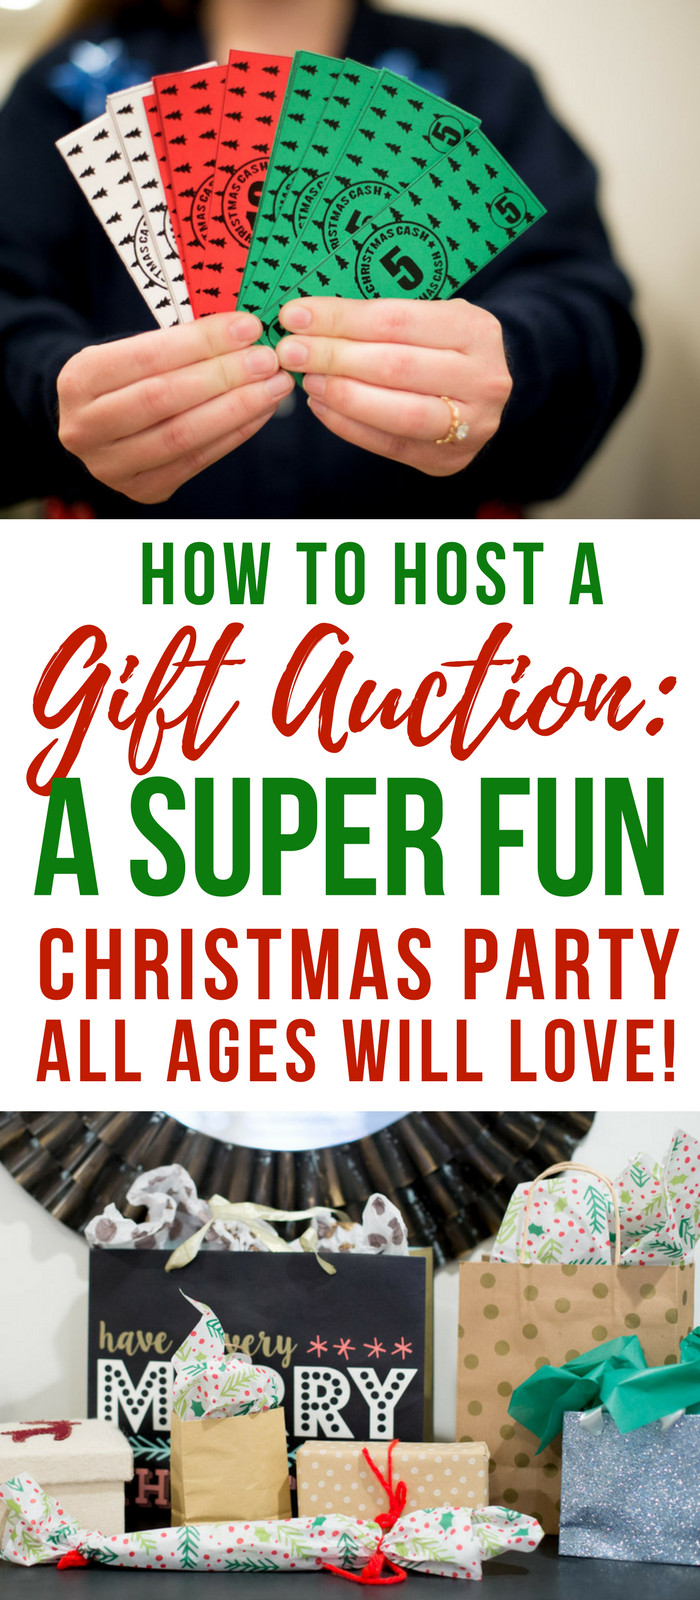 Company Holiday Party Gift Ideas
 How to Do A Christmas Party Gift Auction White Elephant